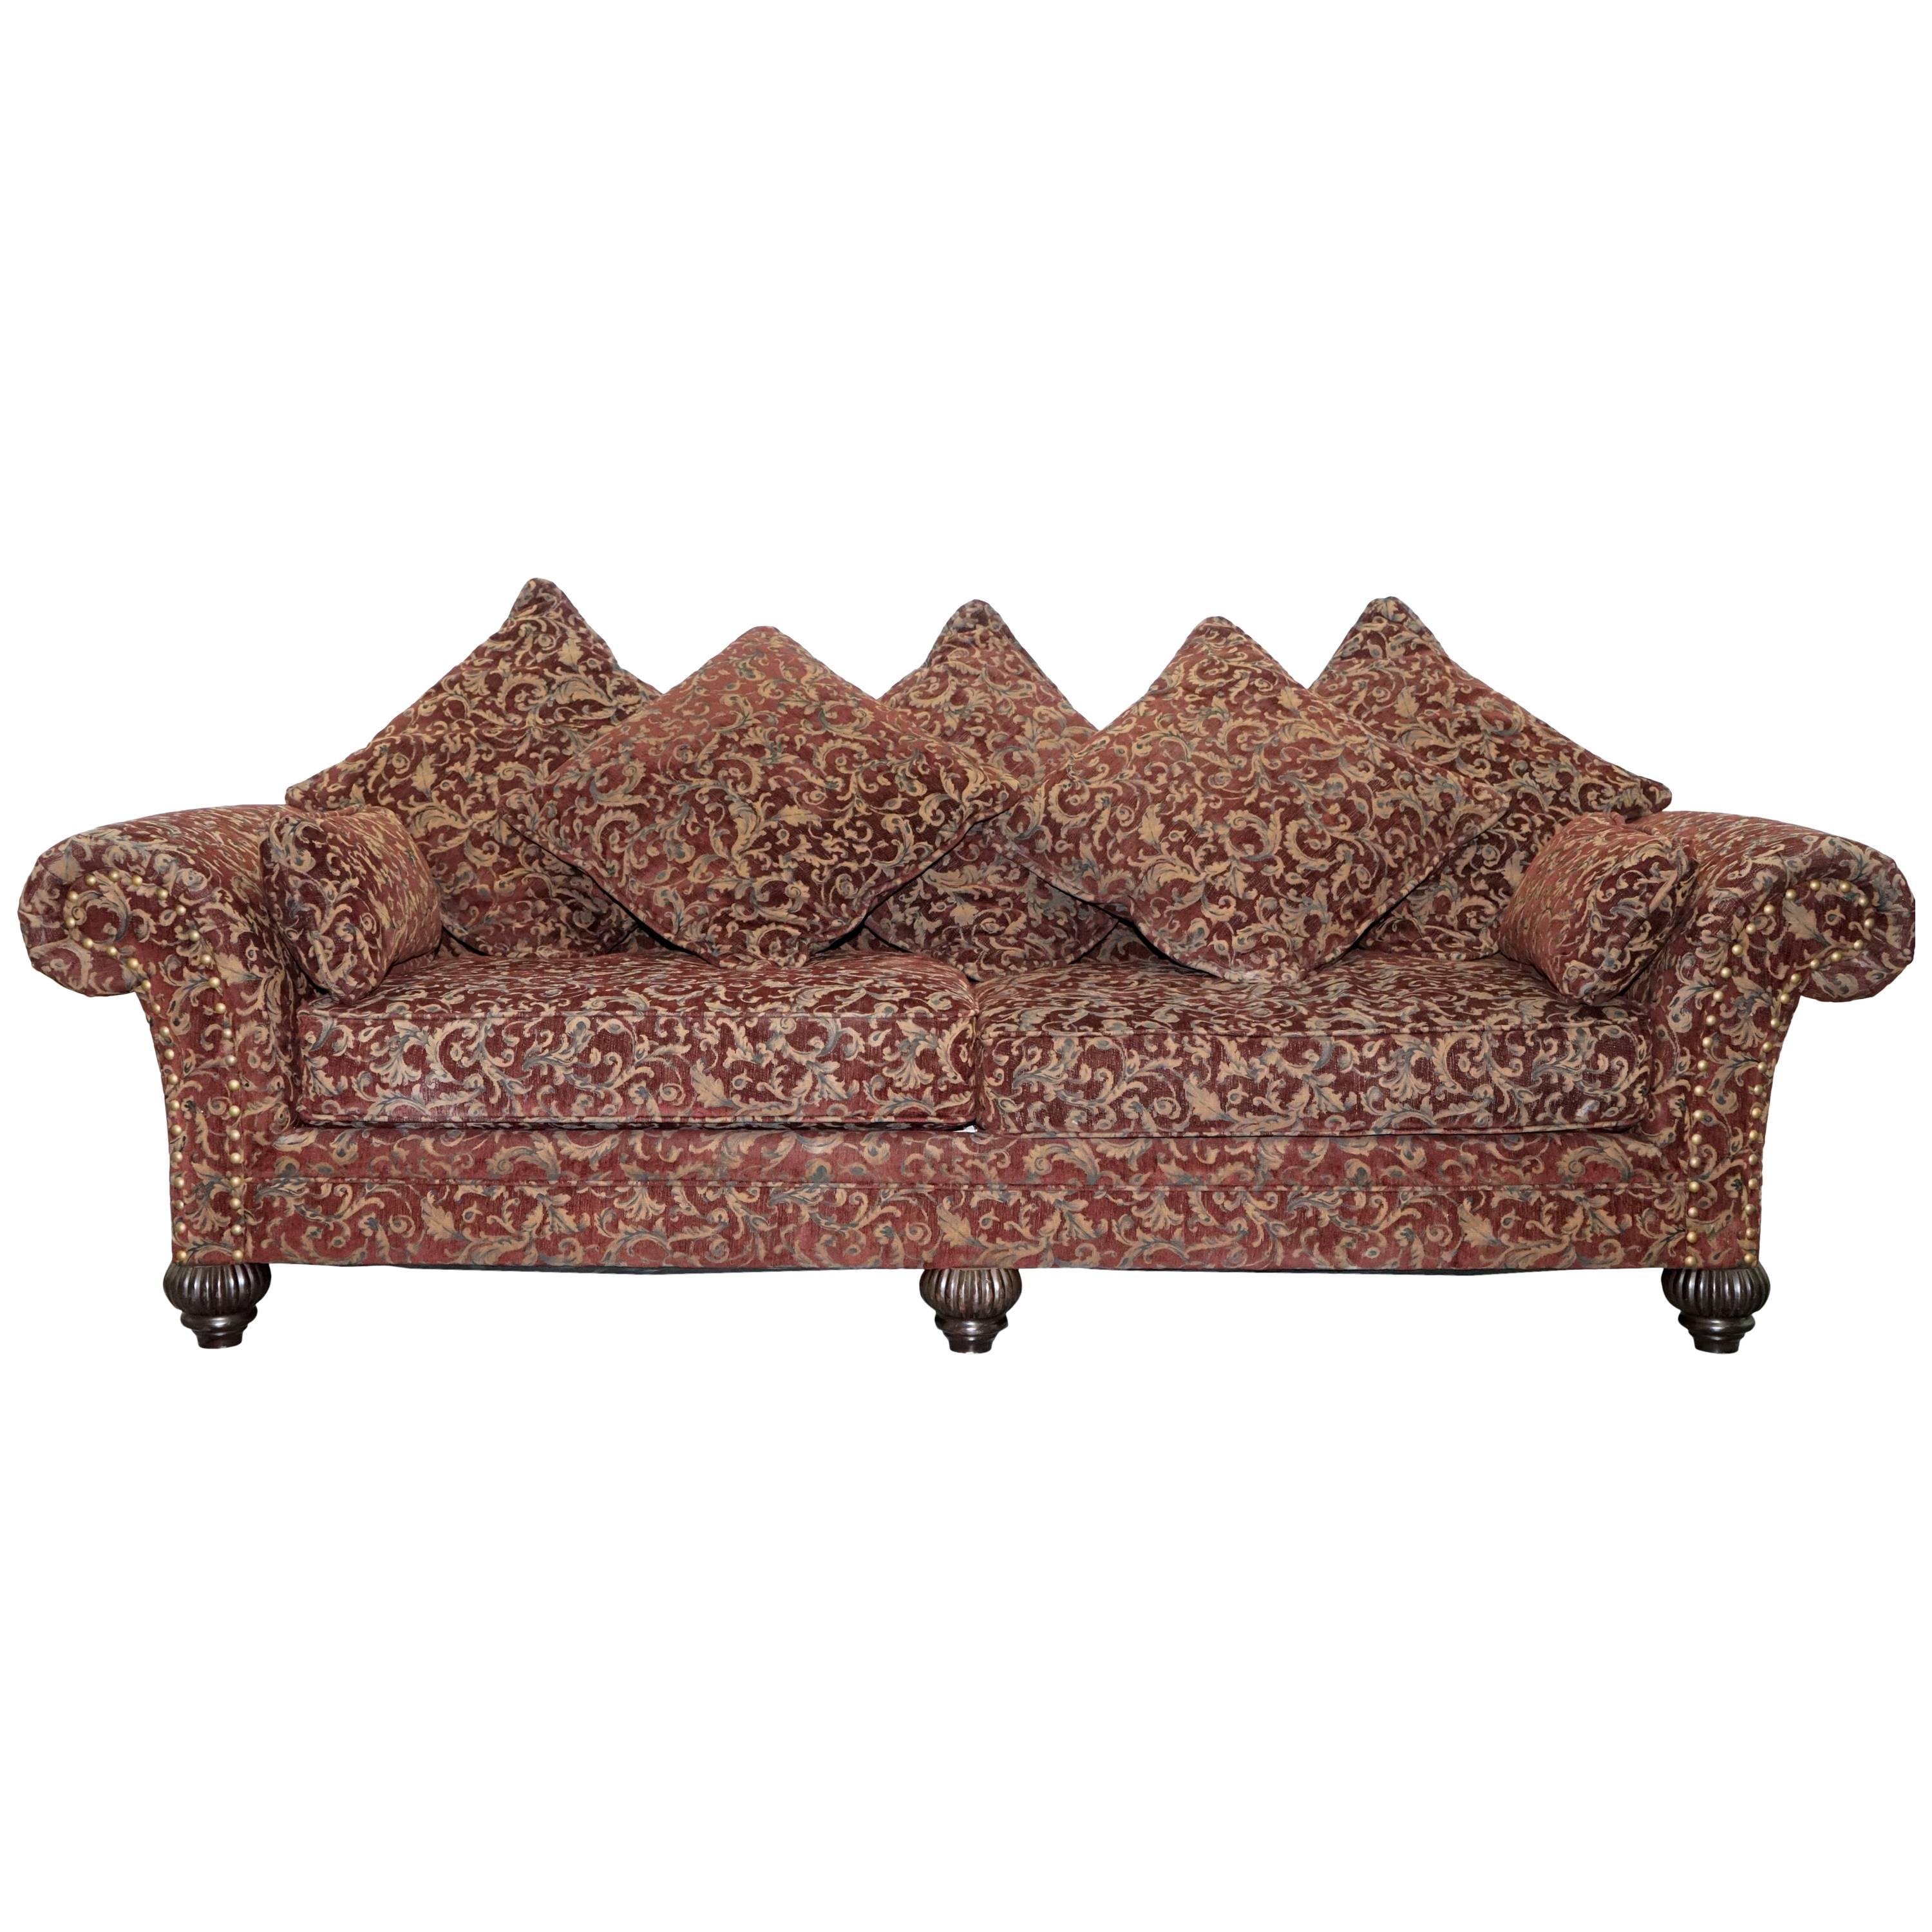 Three-Four Seat Bernhardt Sofa with Spilt Panel Feather Cushions Chesterfield